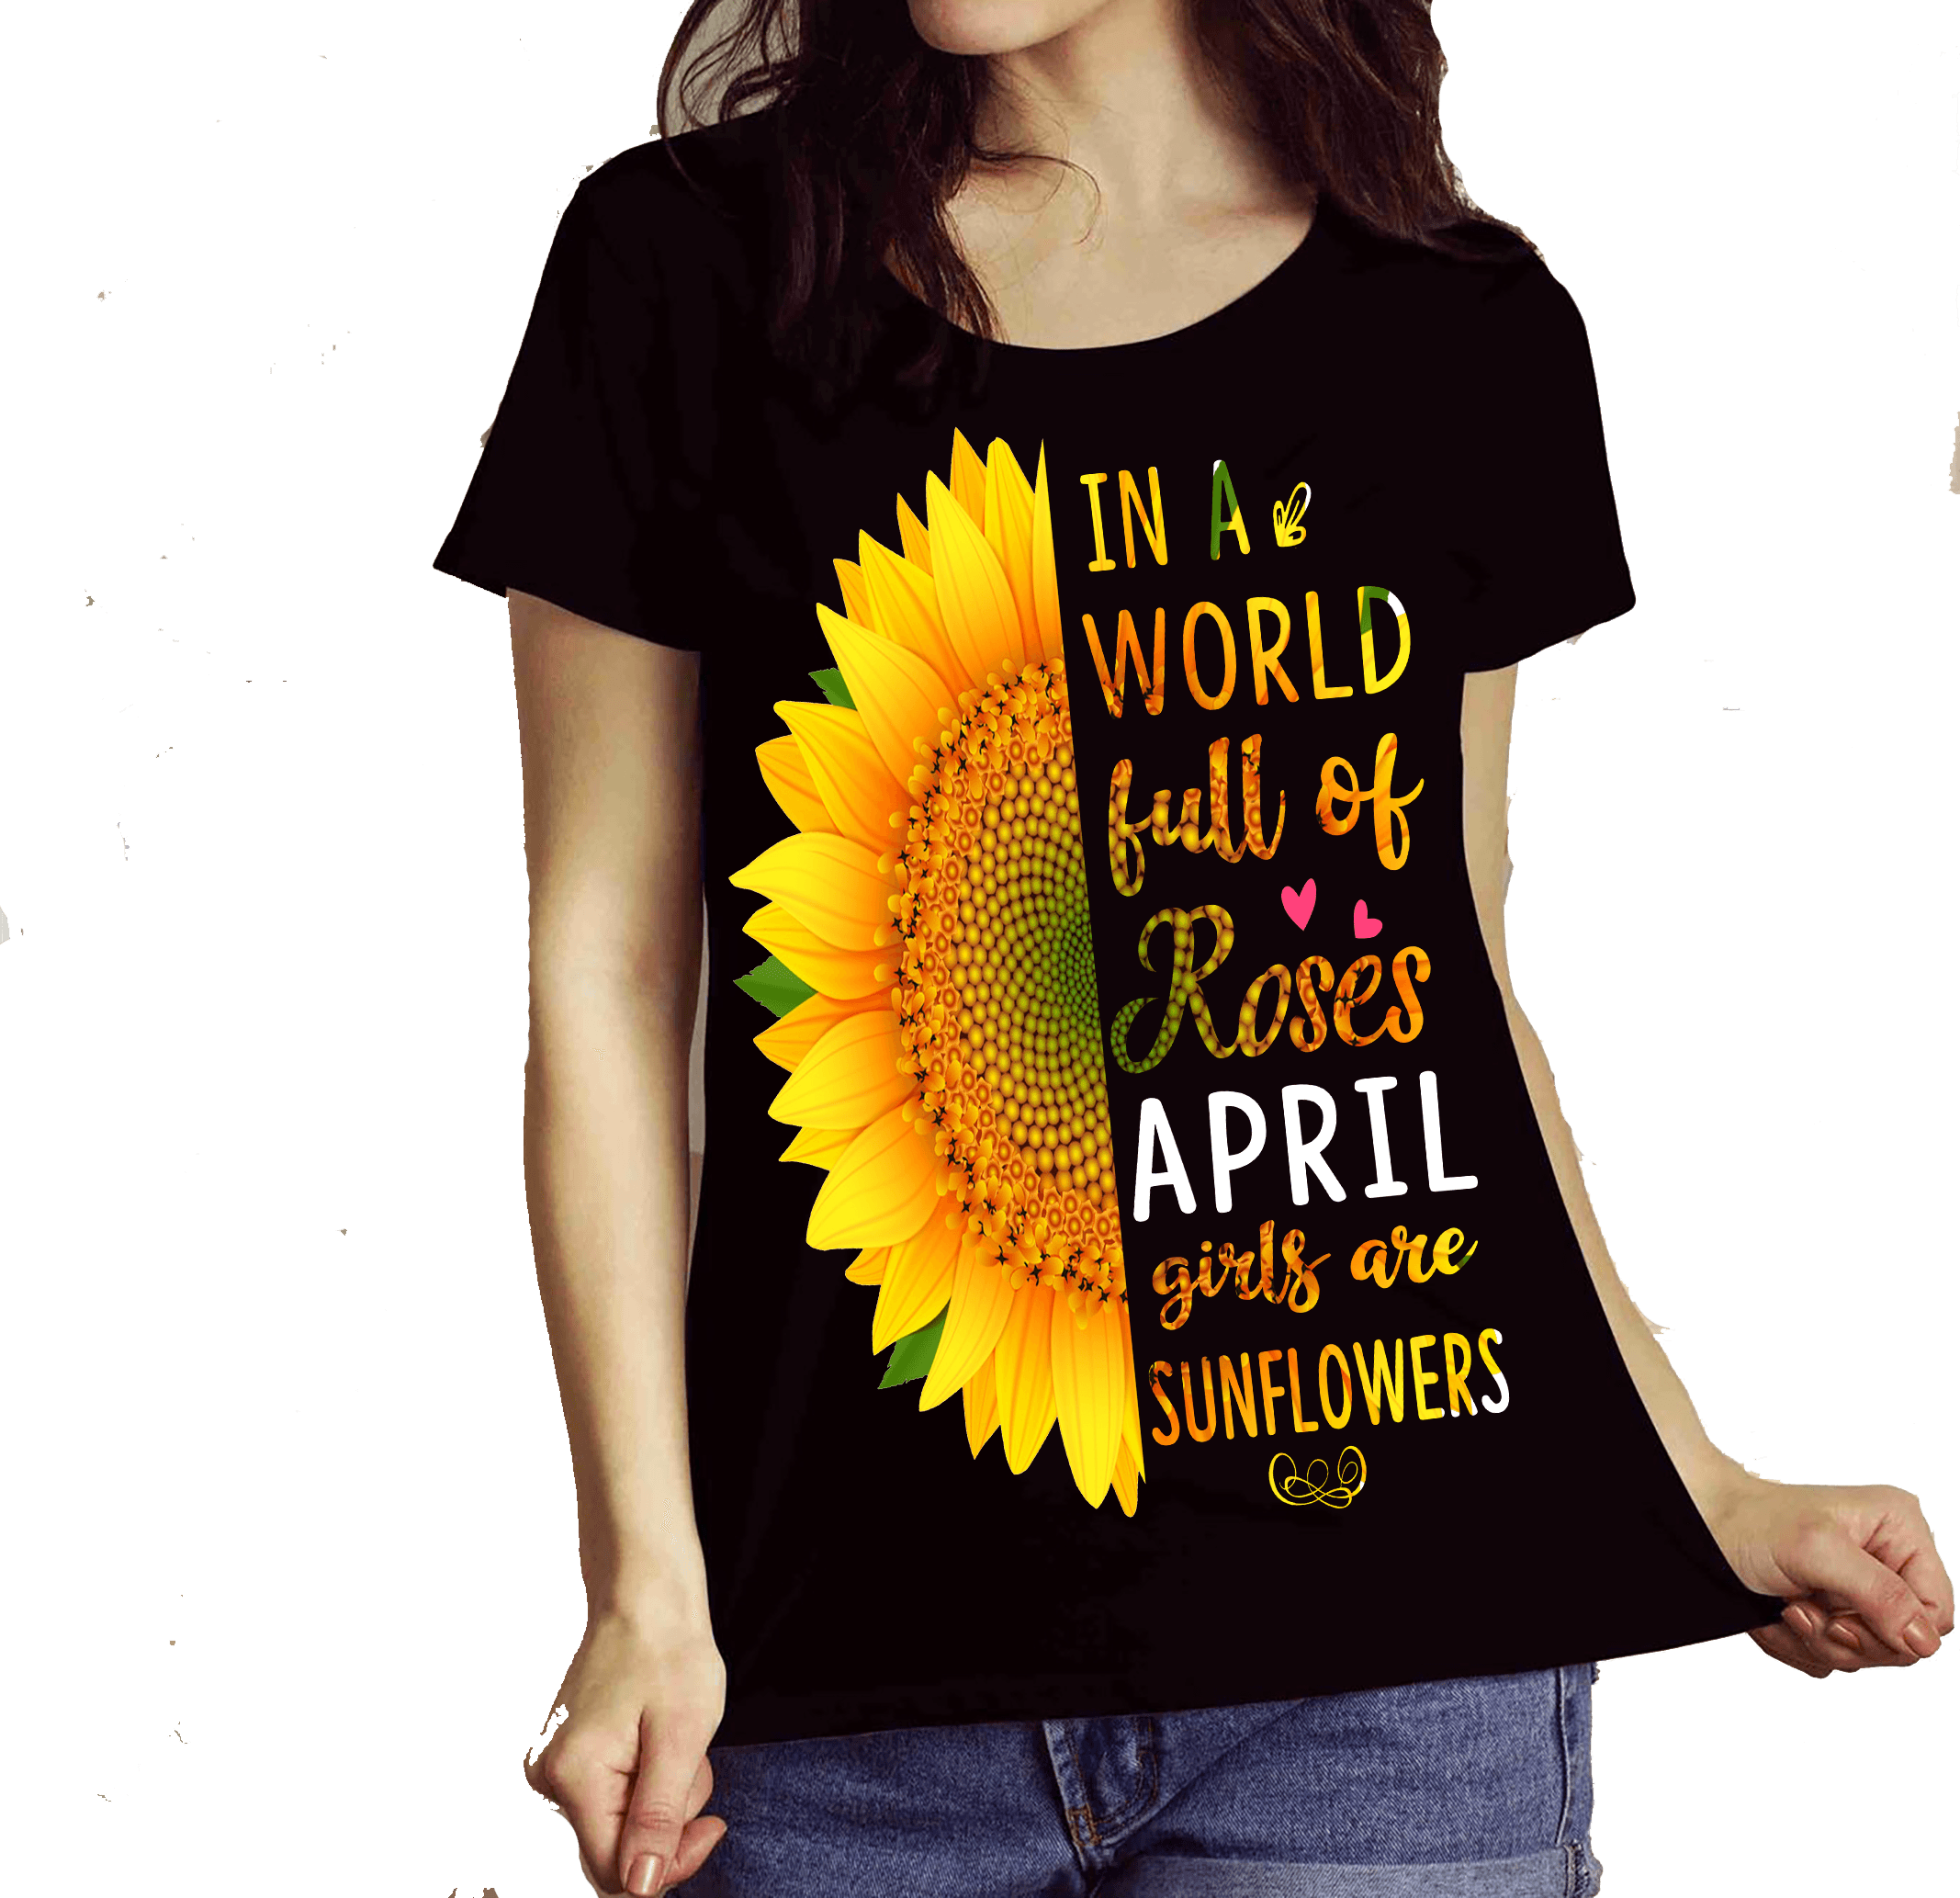 "April Combo (Sunflower And 3 Sides)" Pack of 2 Shirts